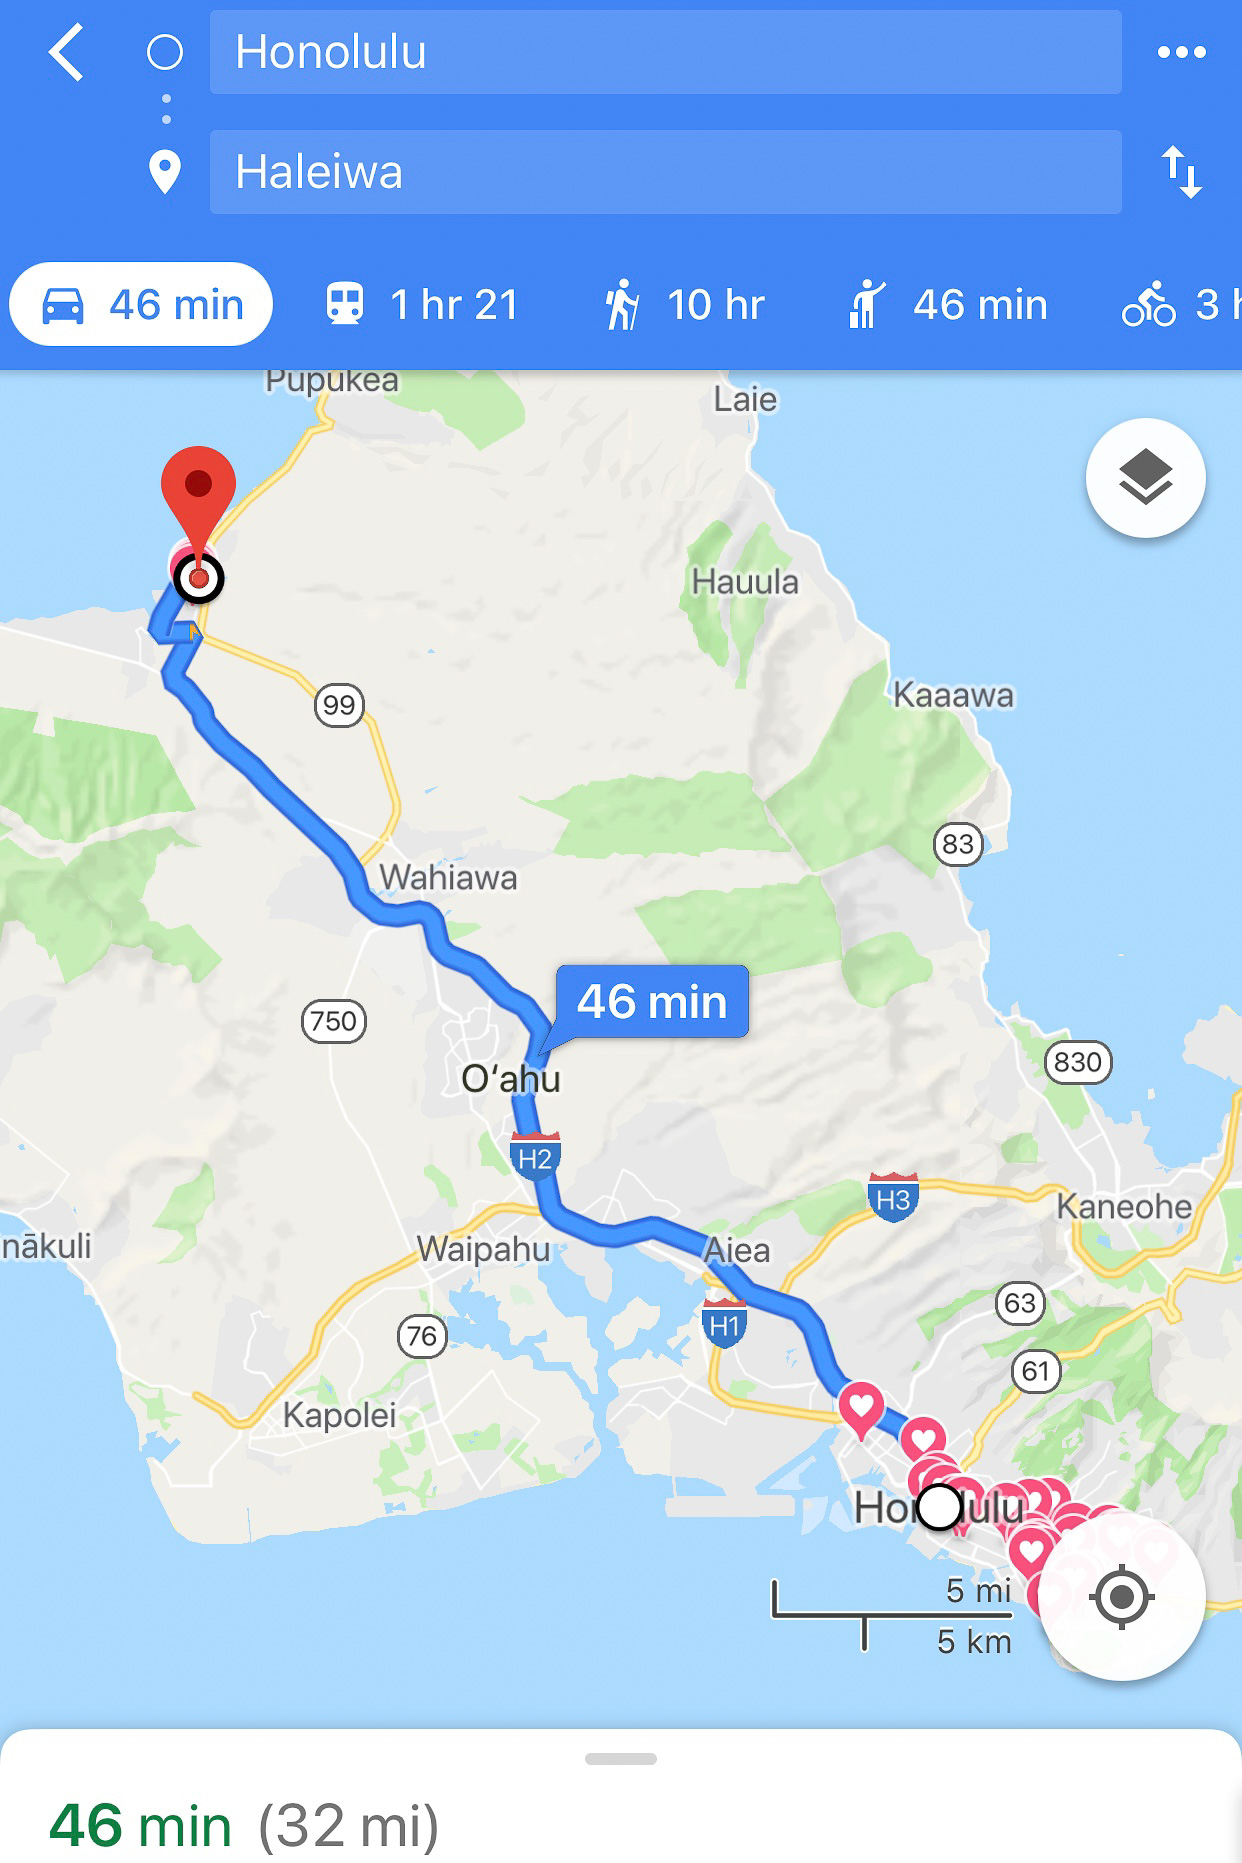 The fastest route